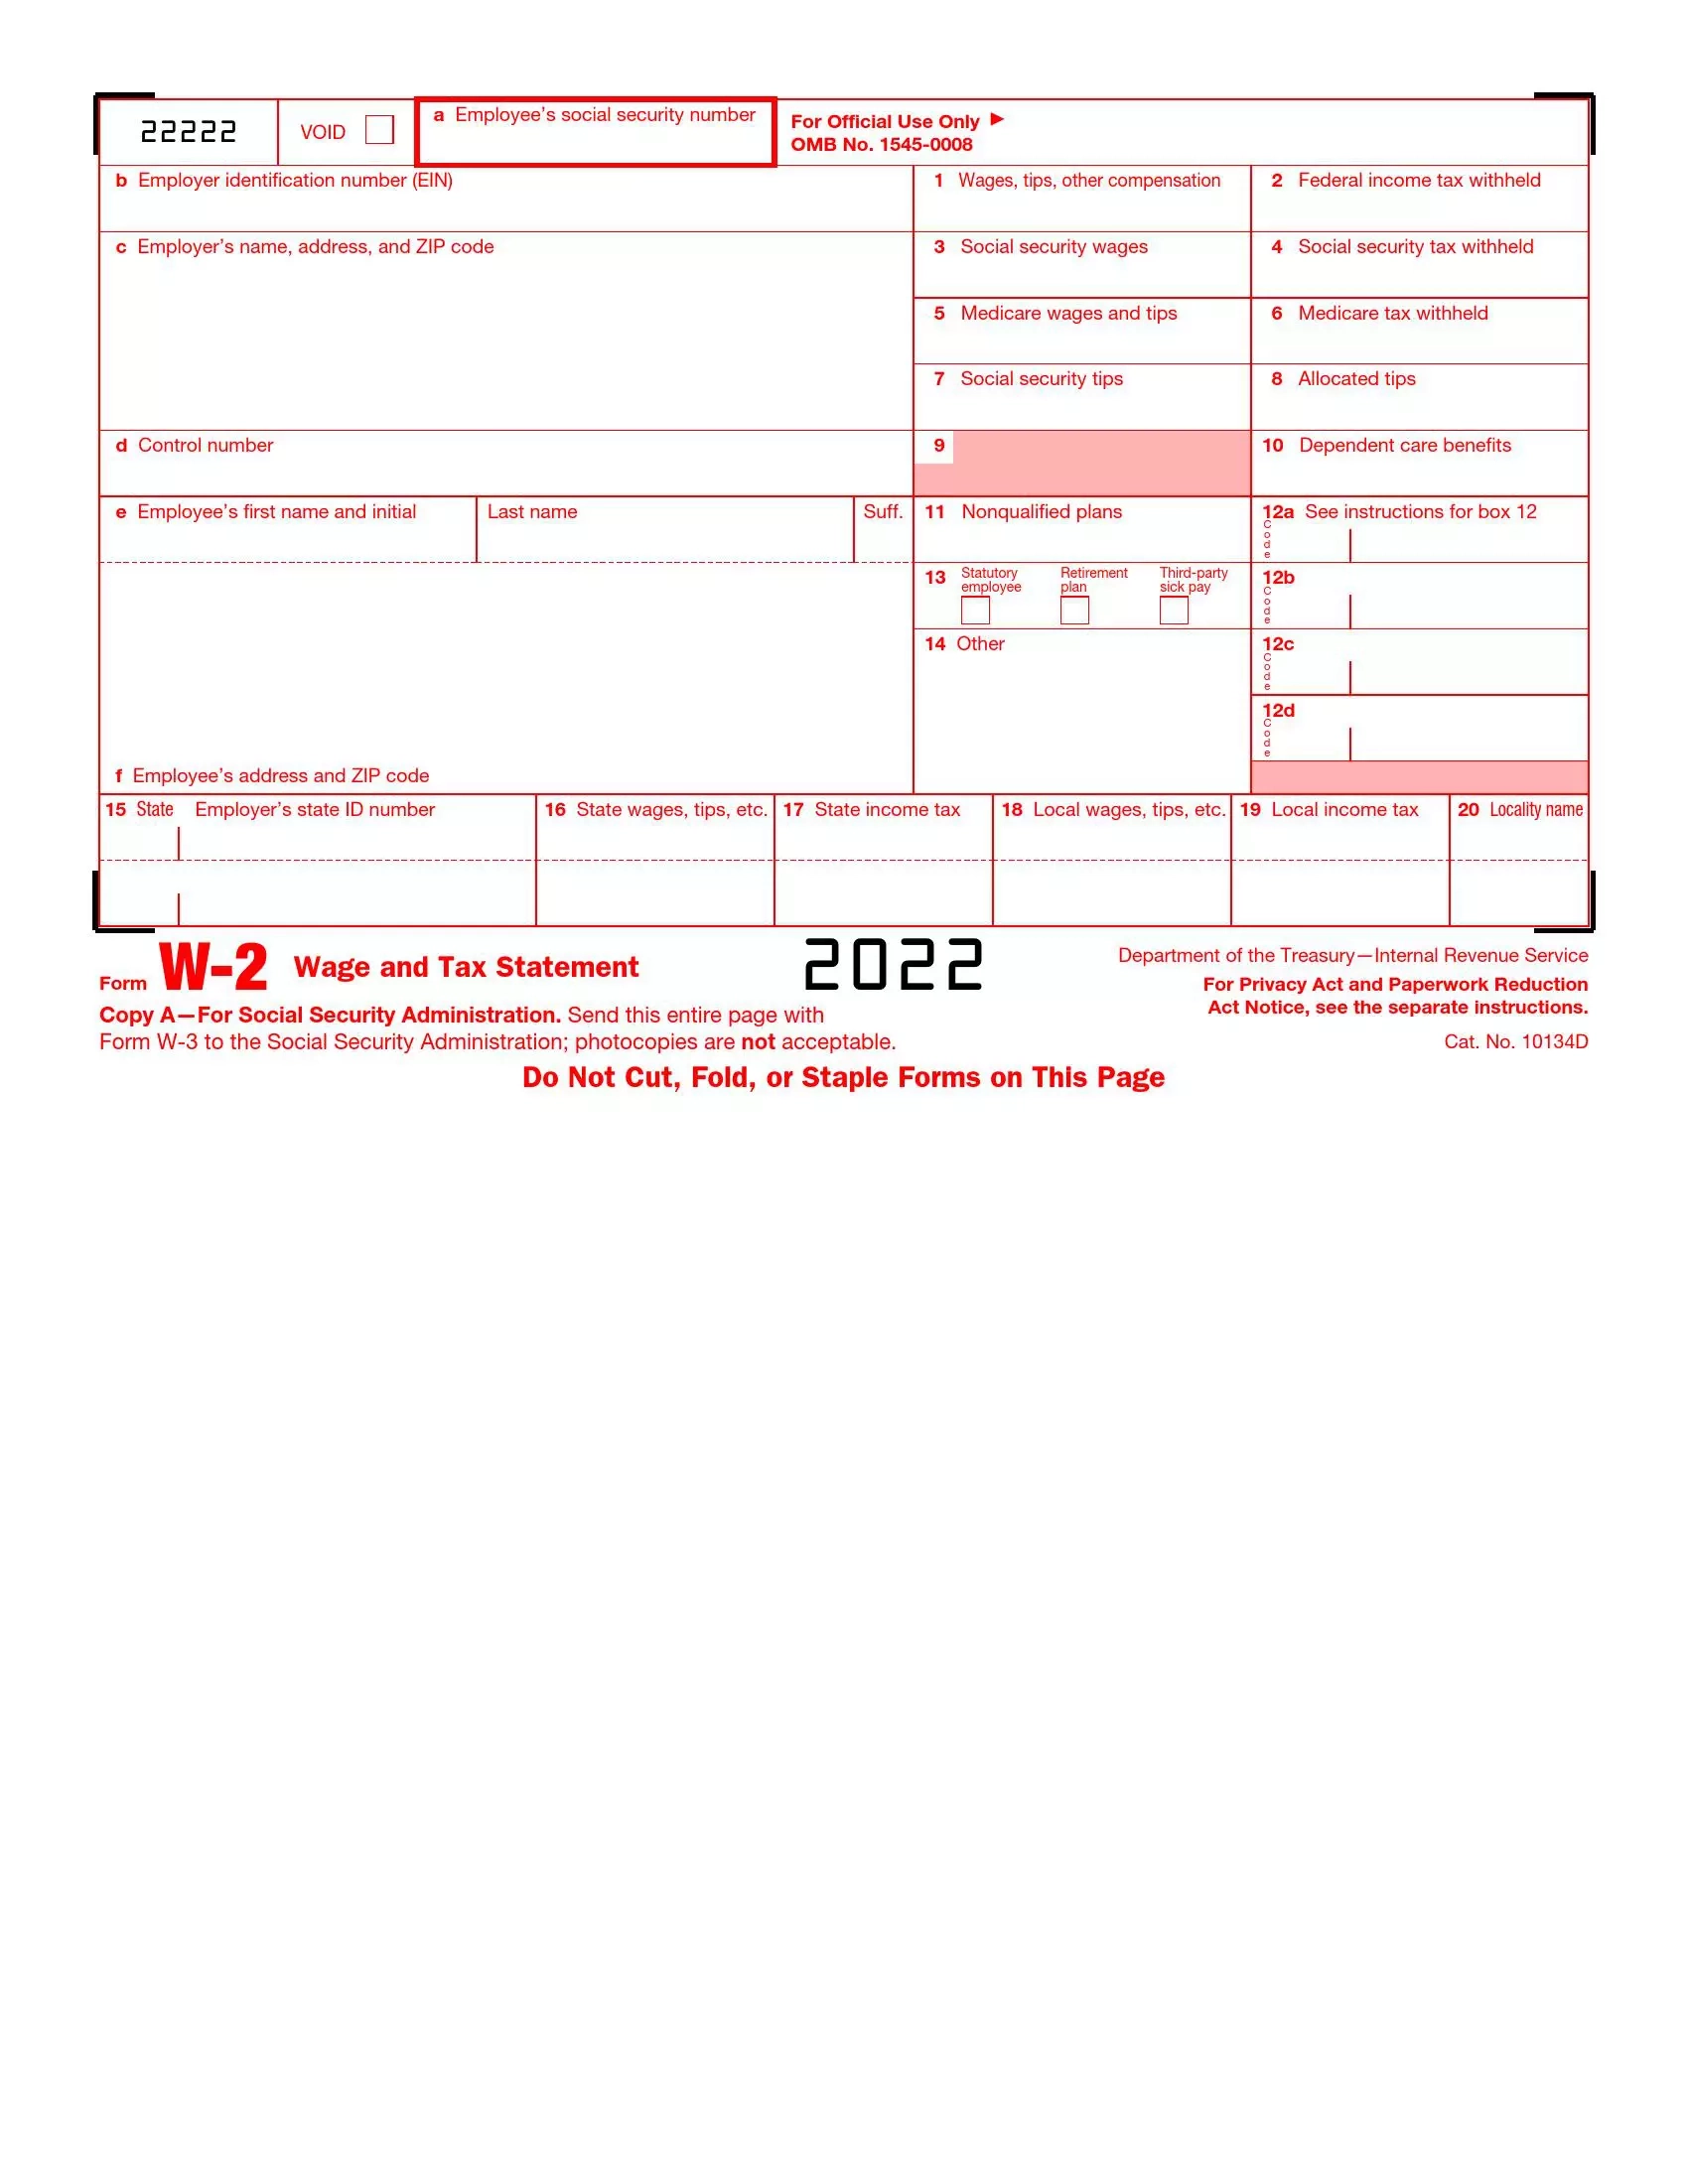 Irs Form W-2 ≡ Fill Out Printable Pdf Forms Online in Fill In W2 Forms Online Free